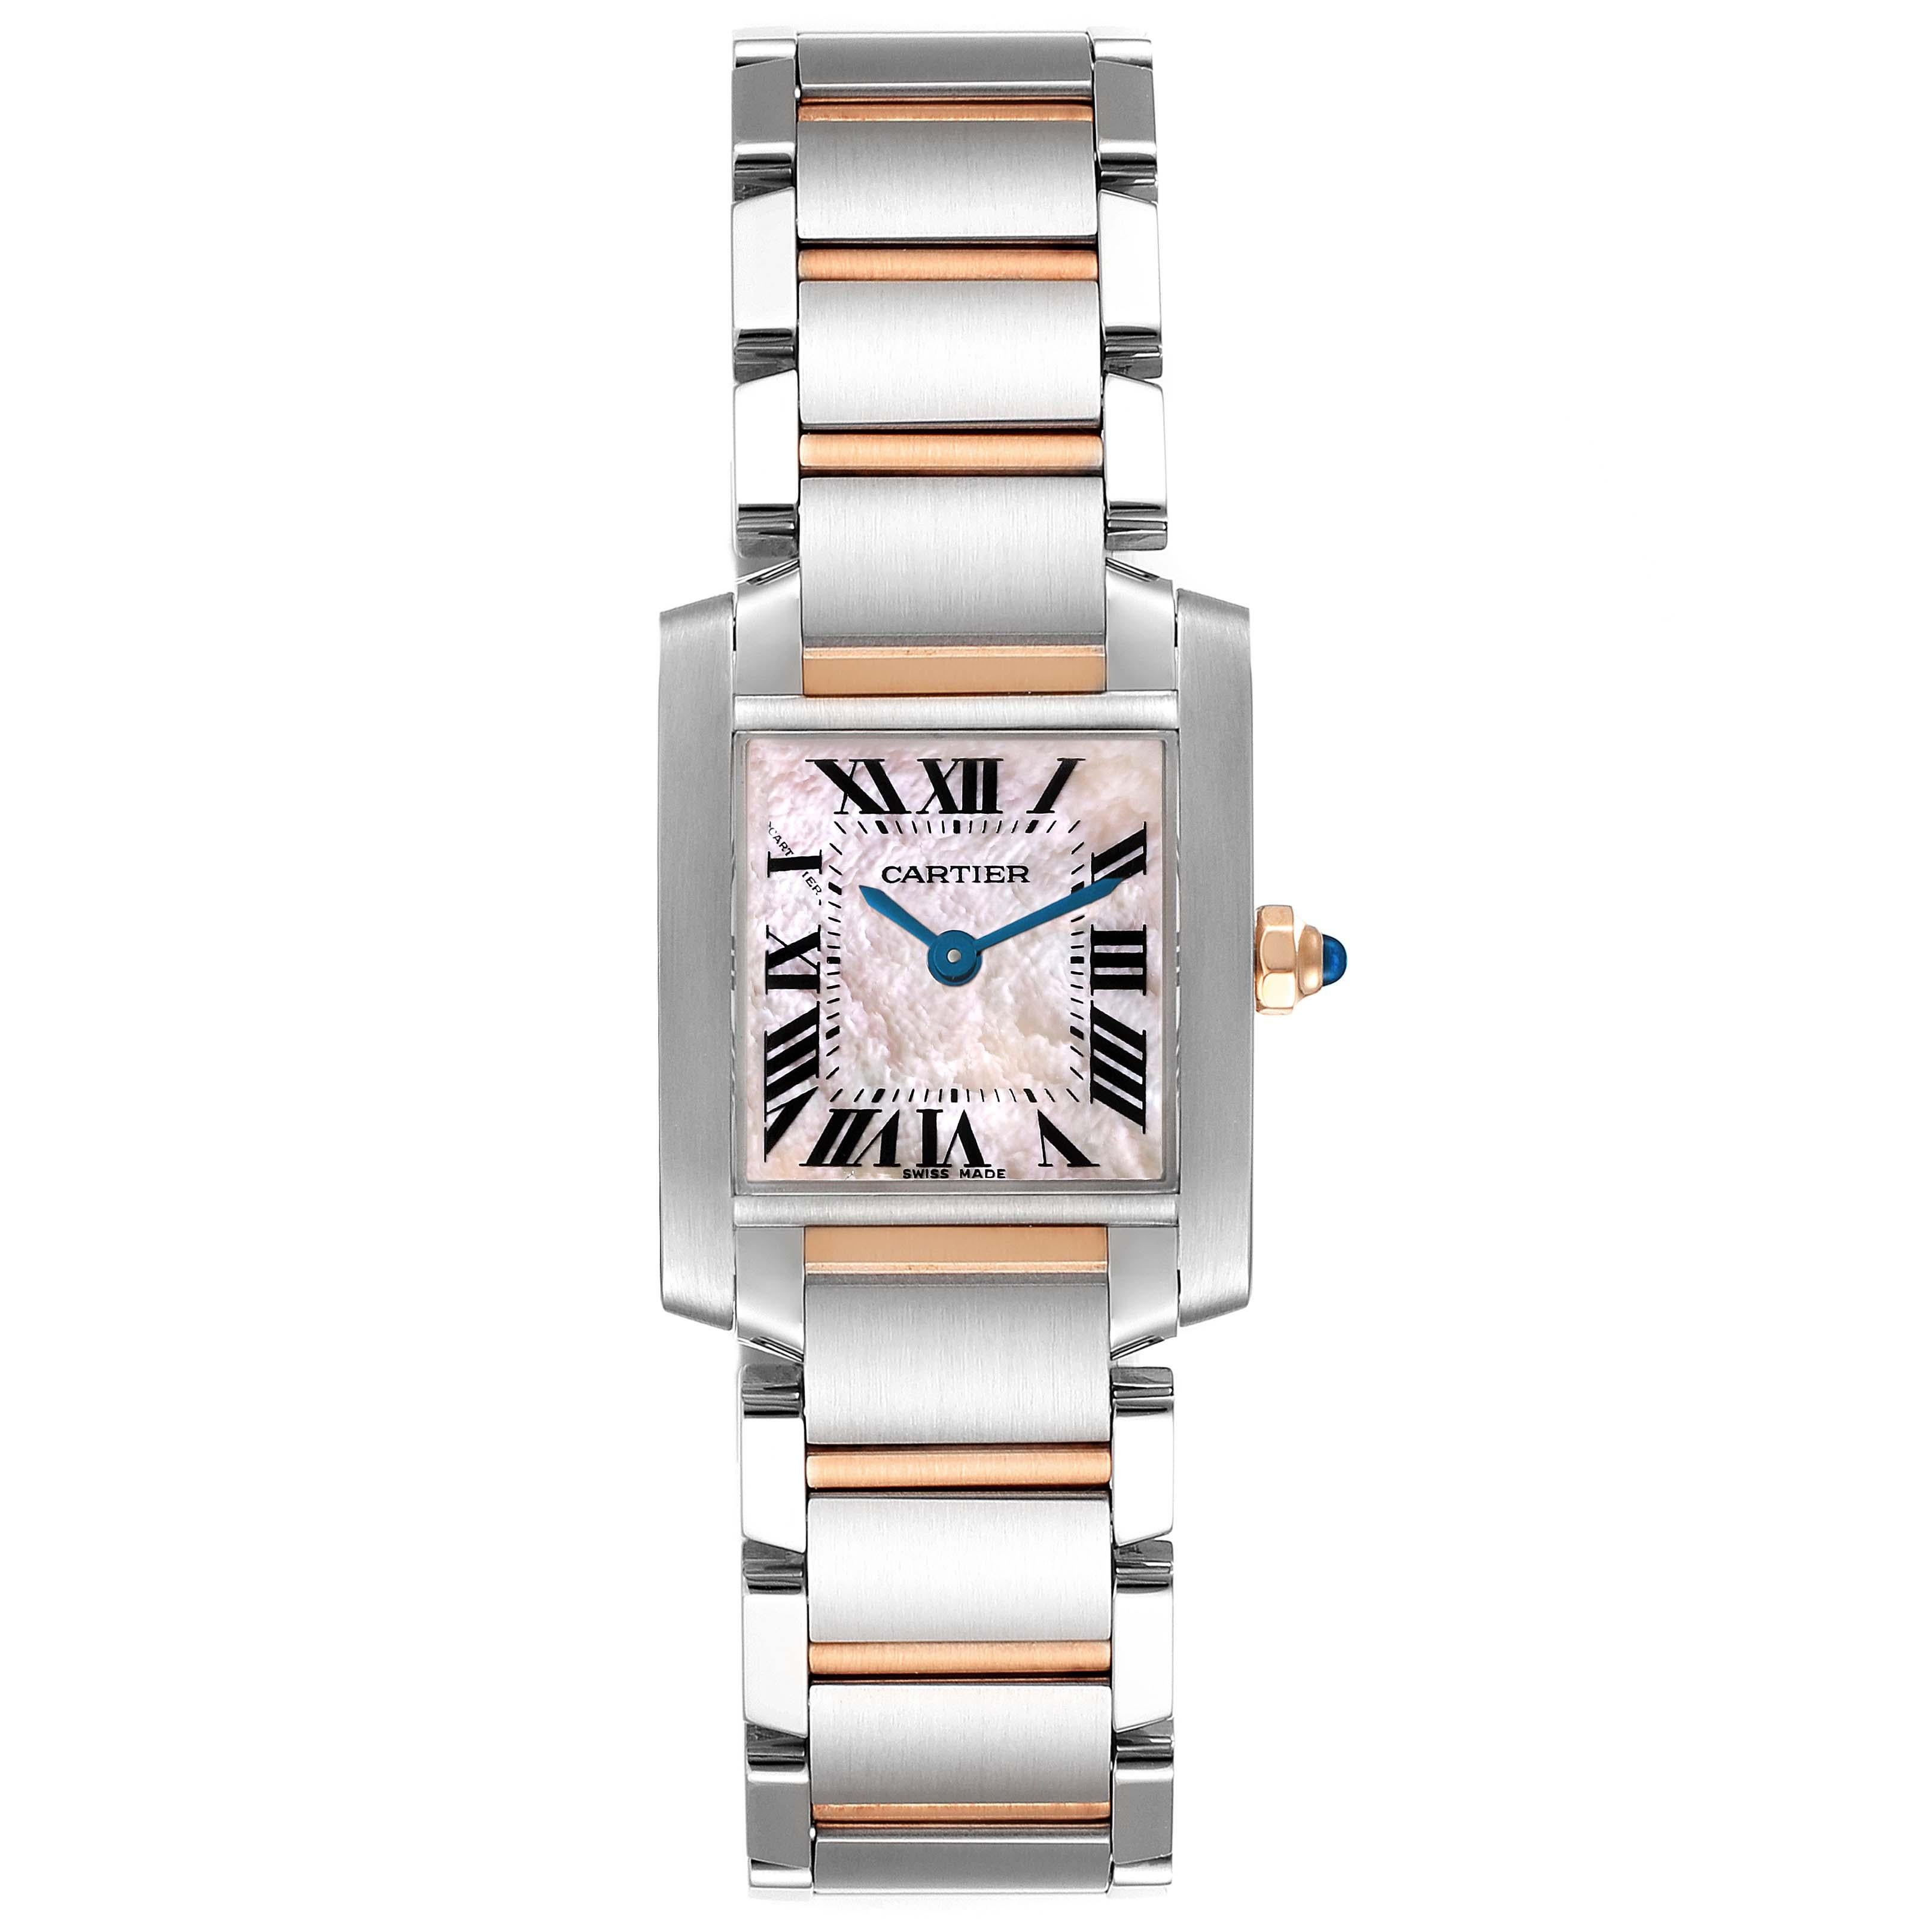 Cartier Tank Francaise Steel Rose Gold MOP Ladies Watch W51027Q4. Quartz movement. Rectangular stainless steel 20.0 x 25.0 mm case. Octagonal 18k rose gold crown set with a blue spinel cabochon. . Scratch resistant sapphire crystal. Pink mother of